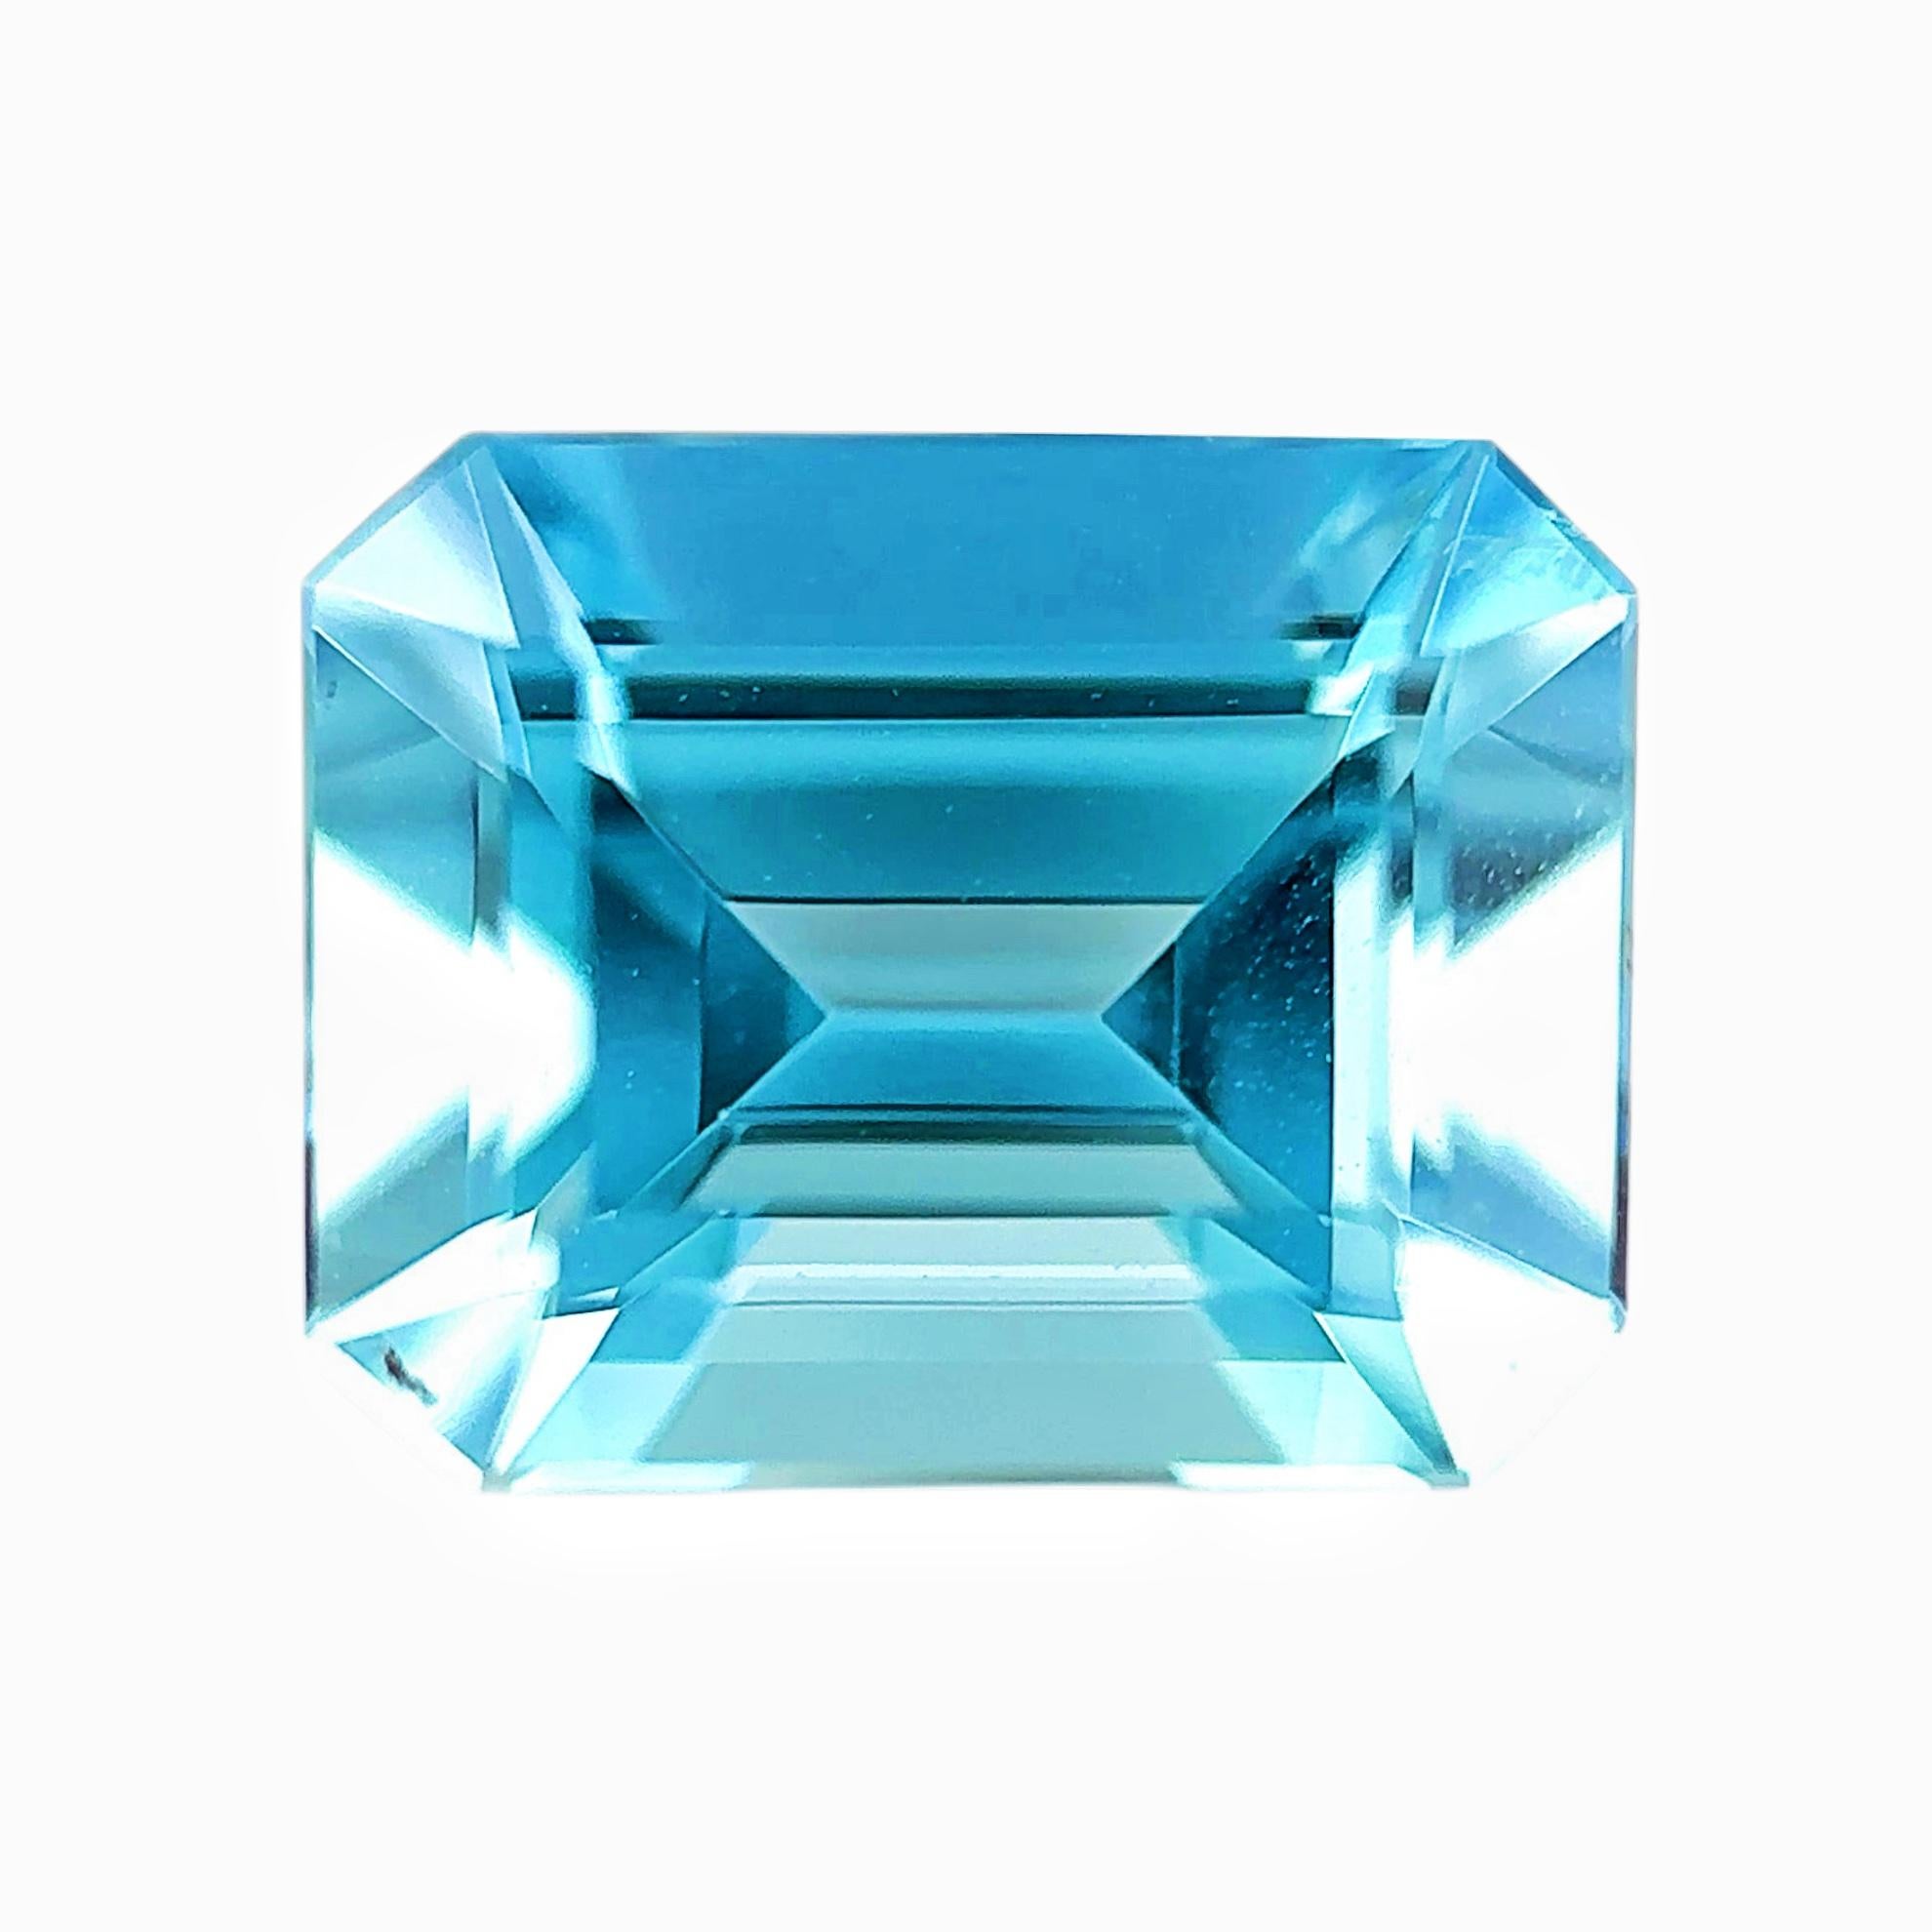 2.04 Carat Natural Santa Maria Color Aquamarine Loose Stone

Appointed lab certificate can be arranged upon request

This Item is ideal for your design as an engagement ring, cocktail ring, necklace, bracelet, etc.


ABOUT US

Xuelai Jewellery